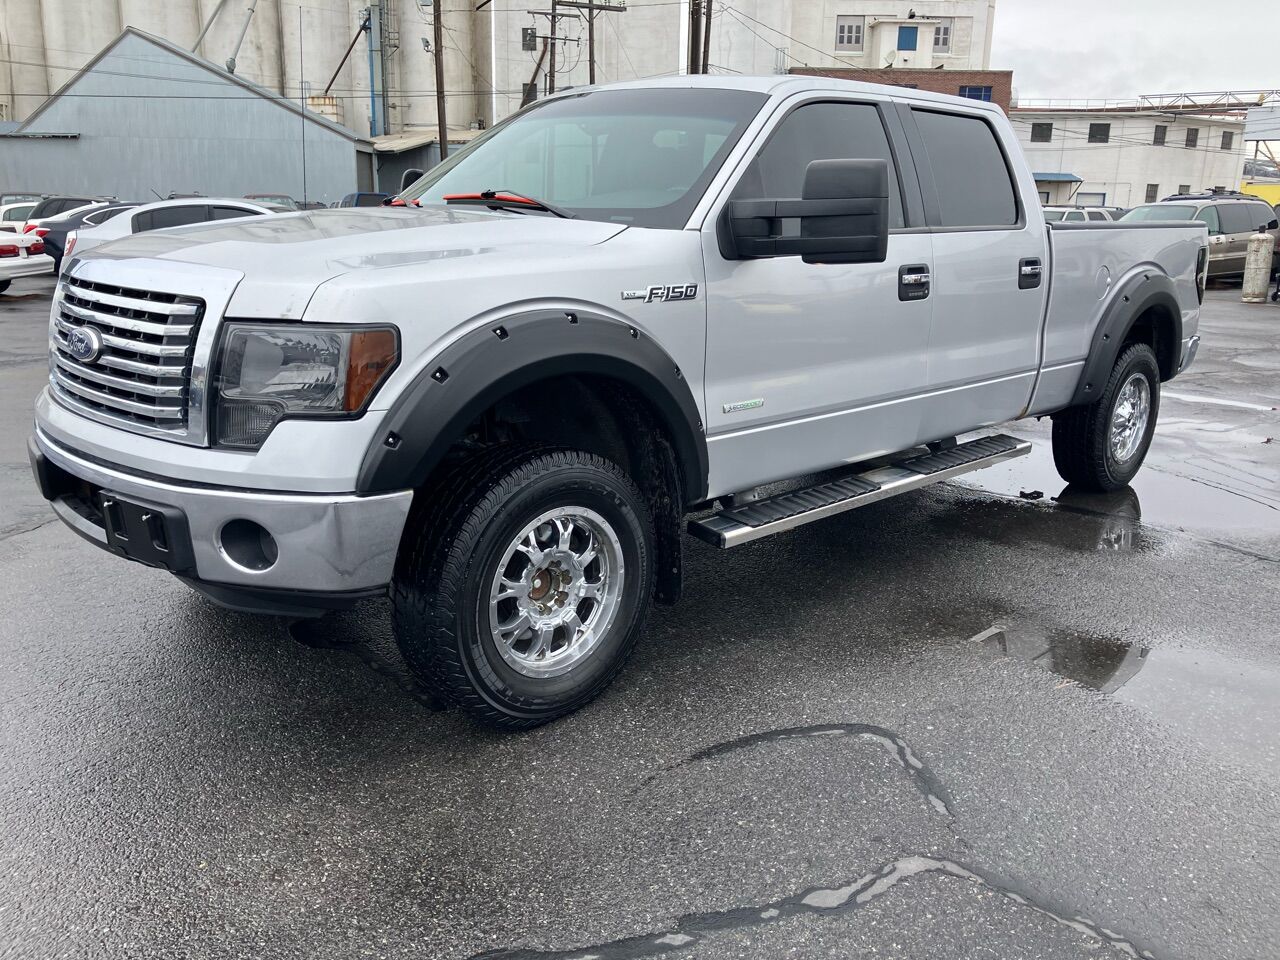 2012 - Ford - F-150 - $10,995